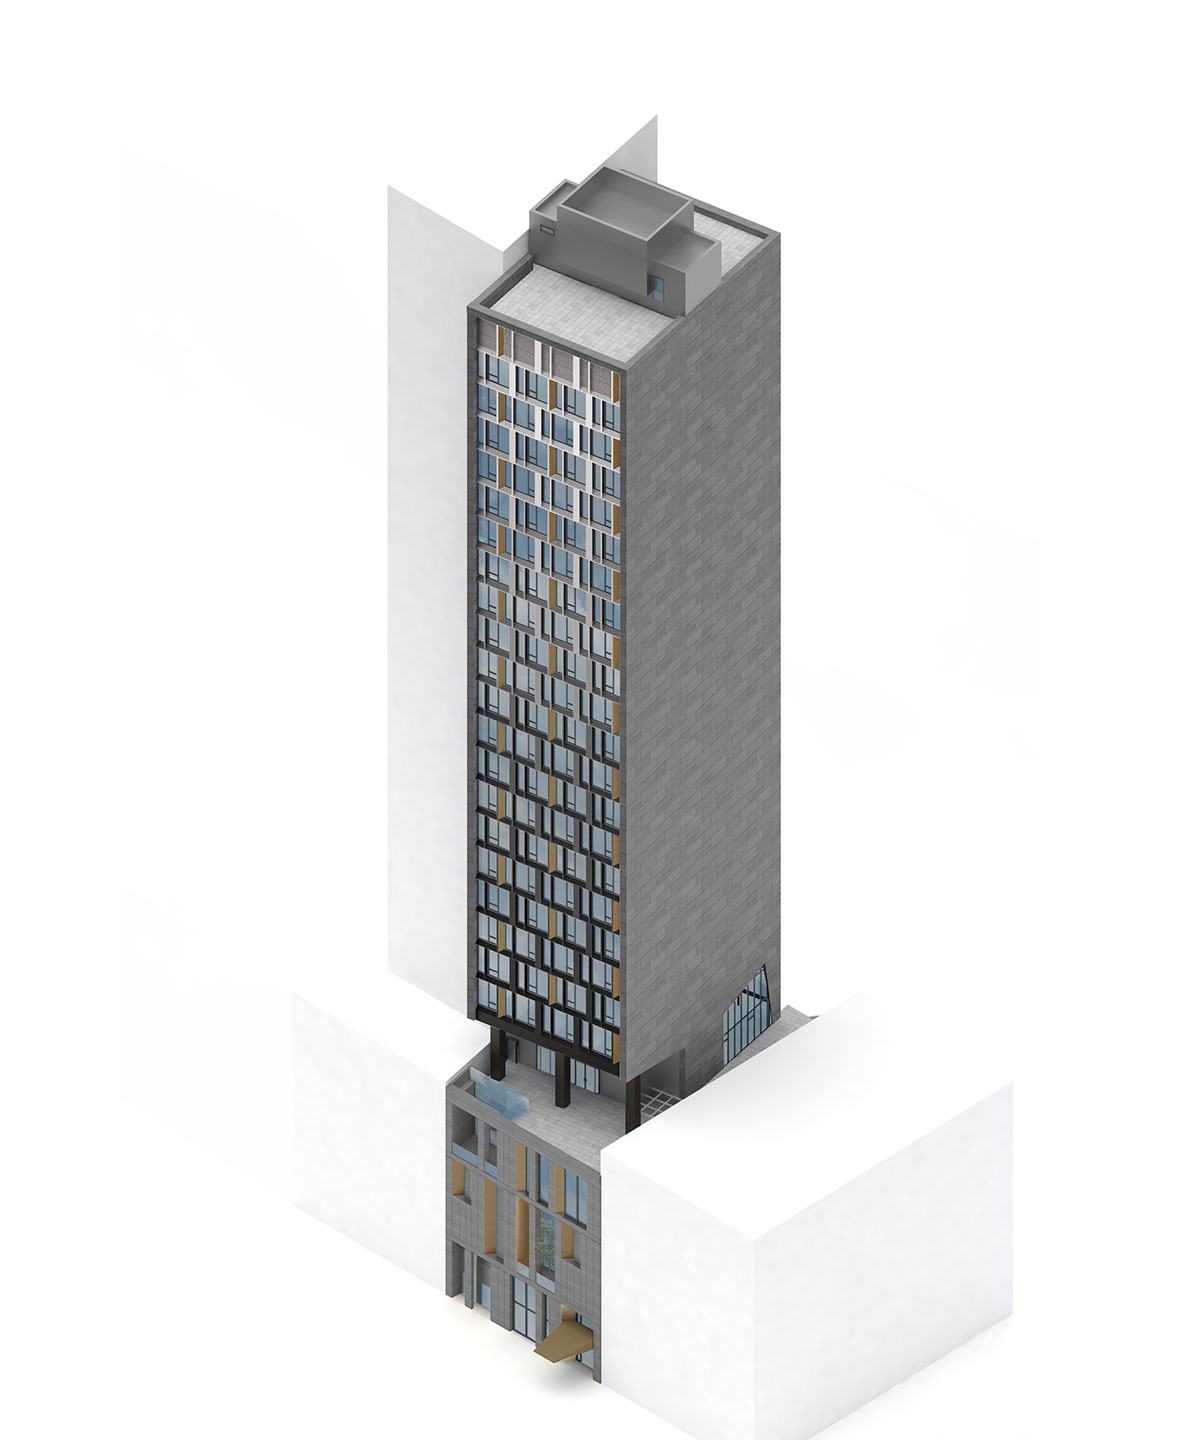 Axonometric view of the Modular AC Hotel project located at 842 Sixth Avenue in NoMad, New York City designed by the architecture studio Danny Forster & Architecture